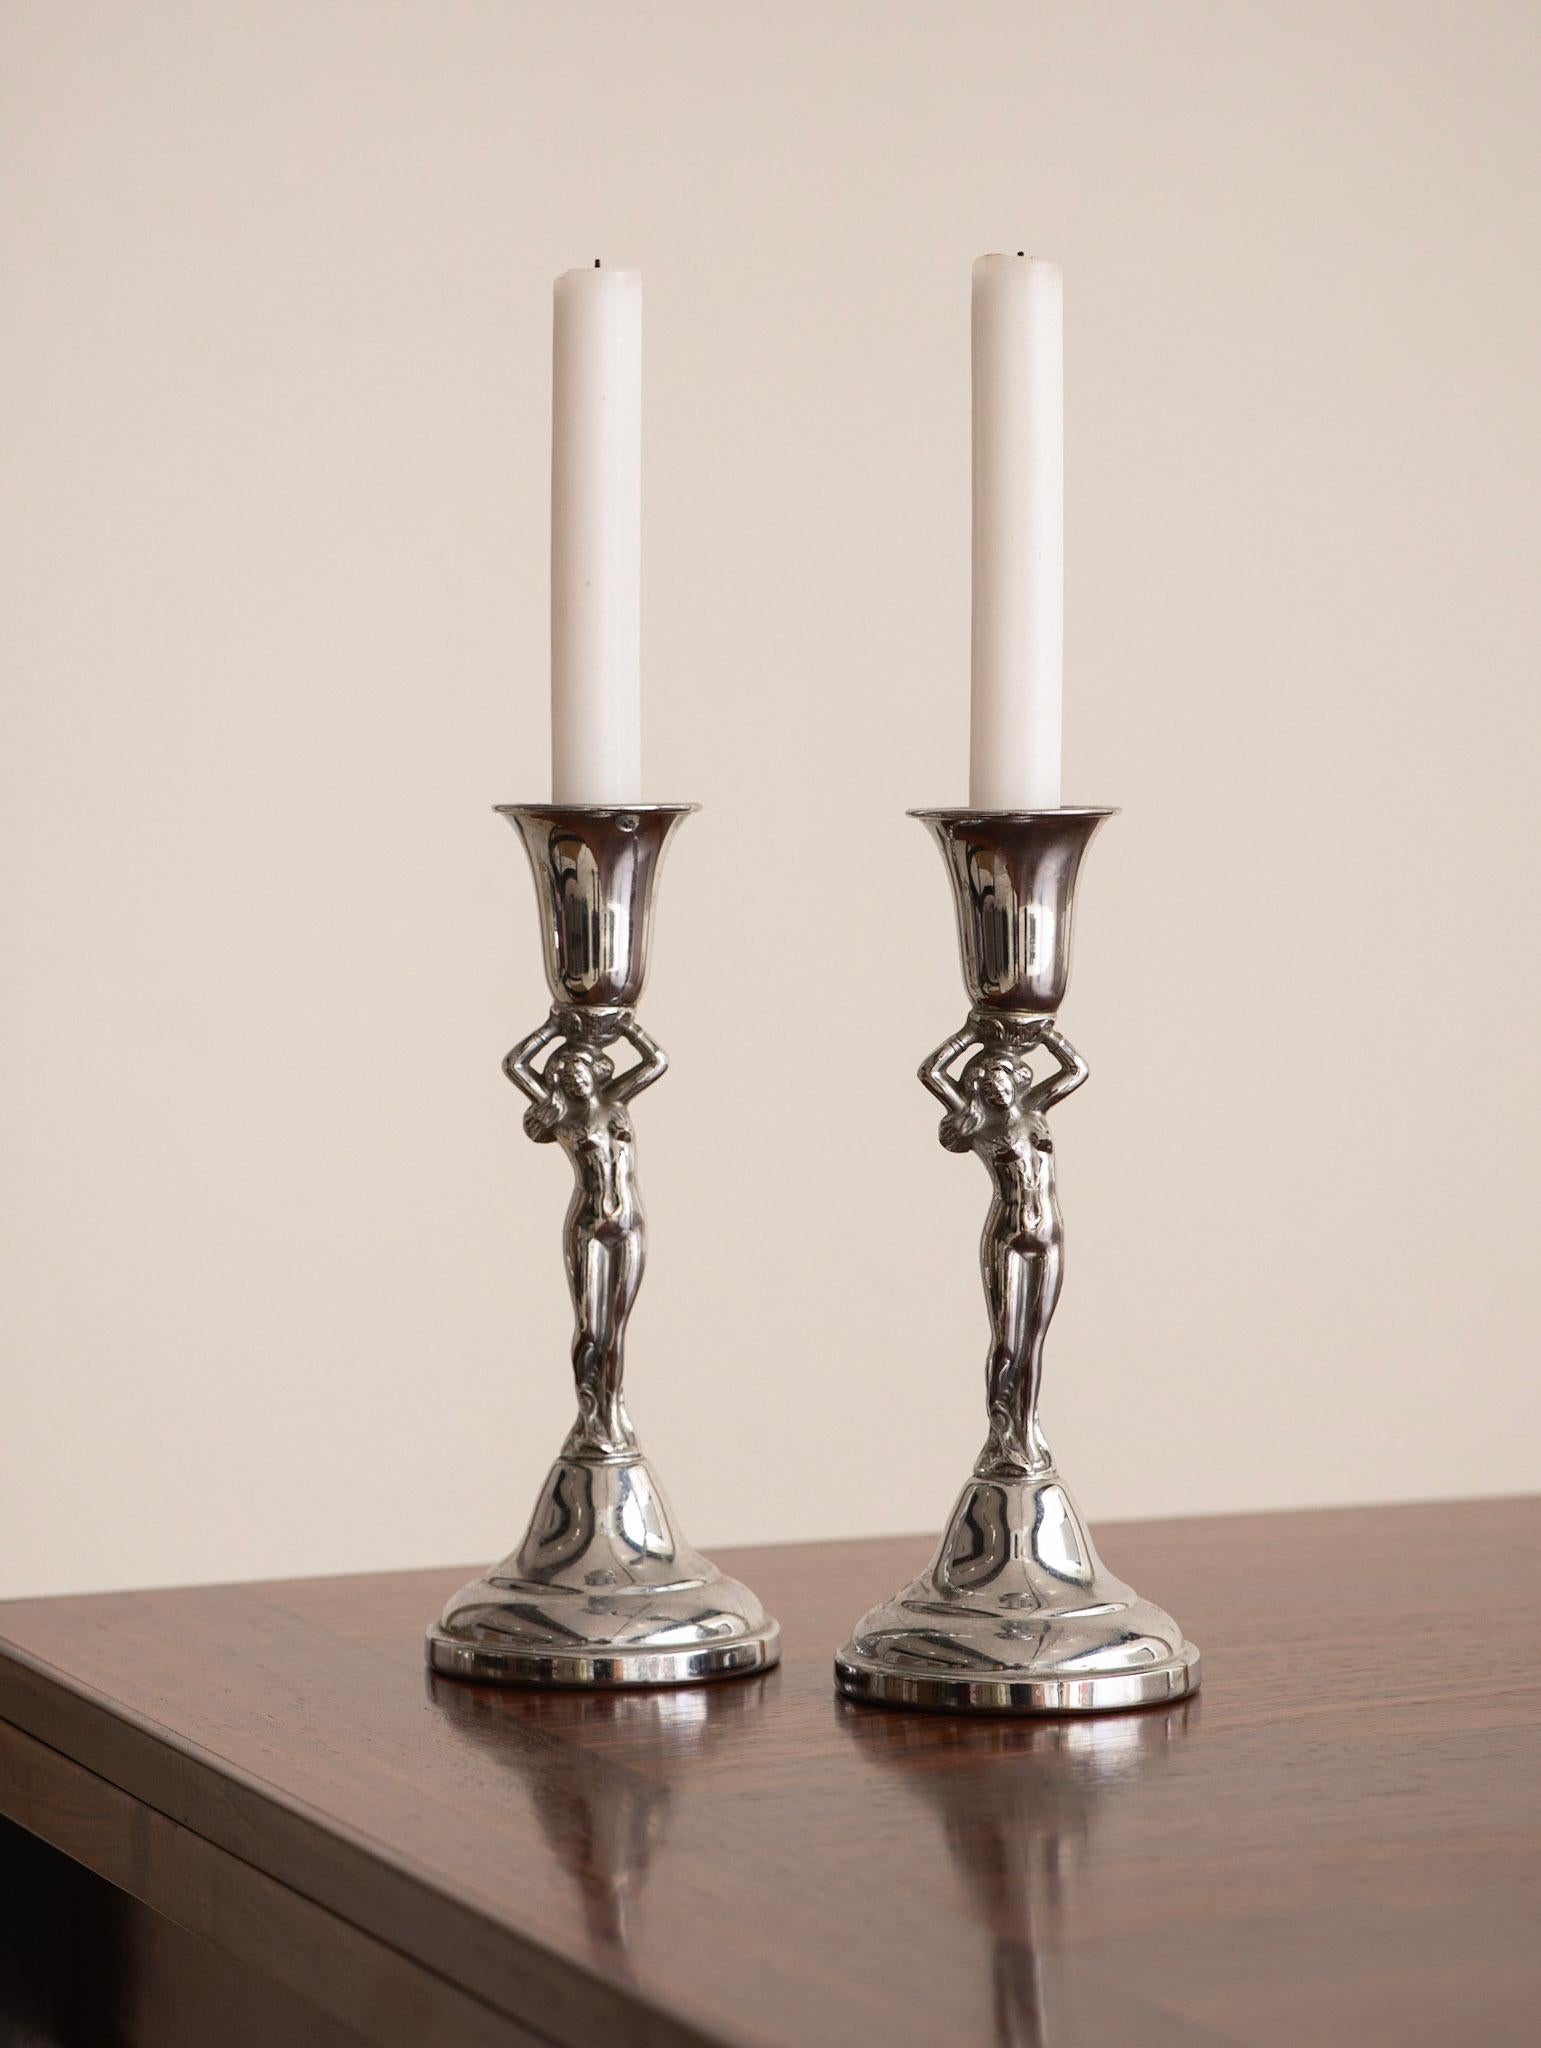 A pair of mid-century figural nude candlesticks. Marked “Krome Kraft Farber Bros.”